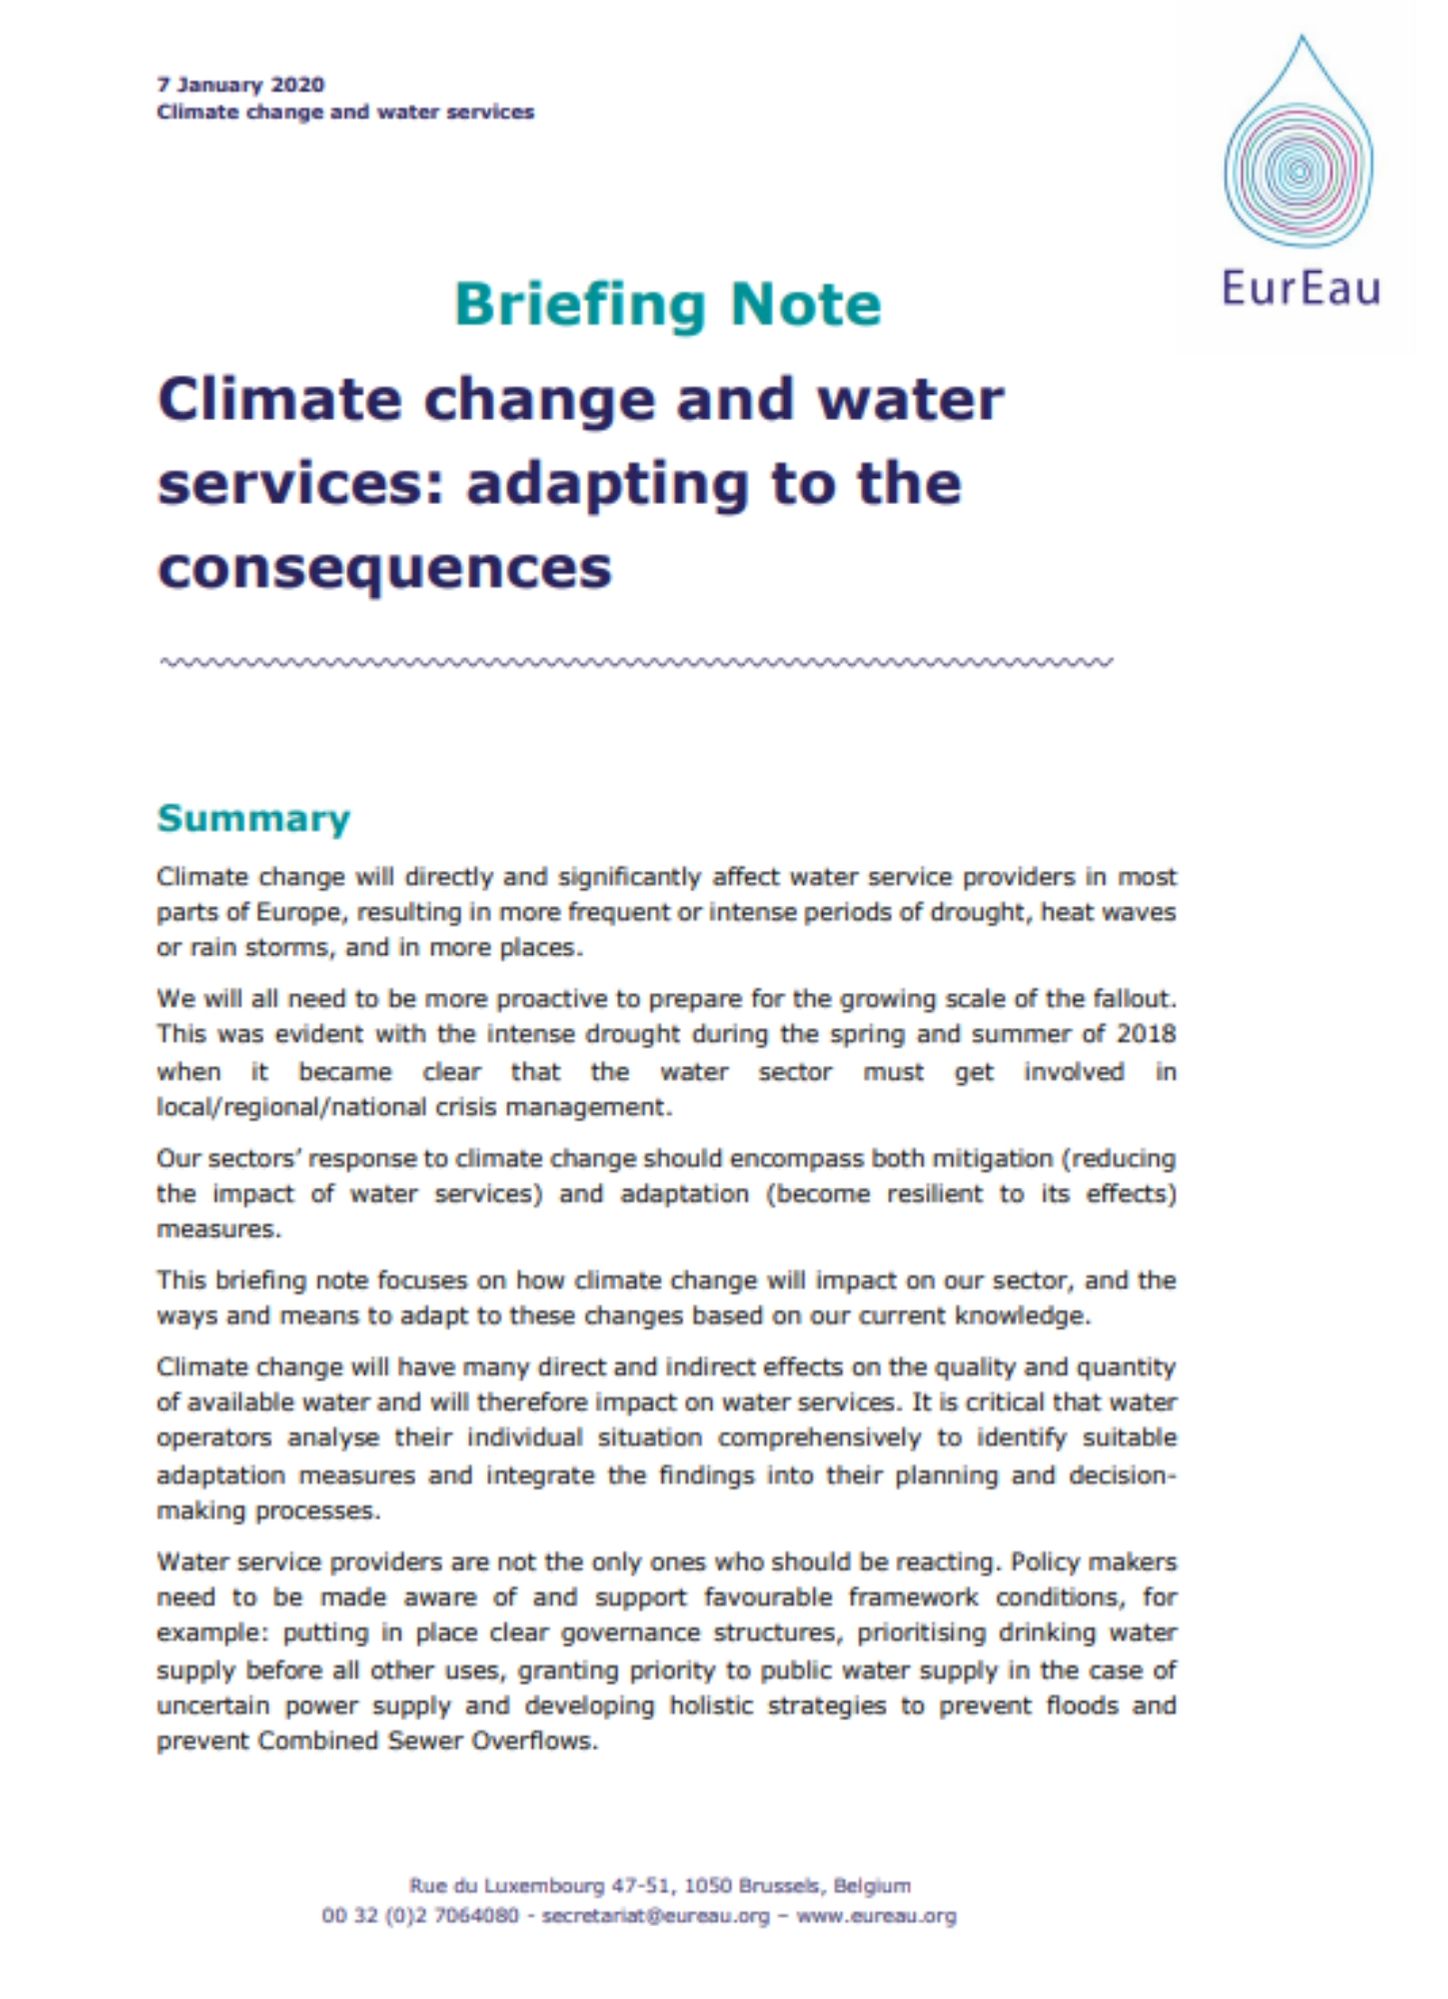 Briefing note on climate change